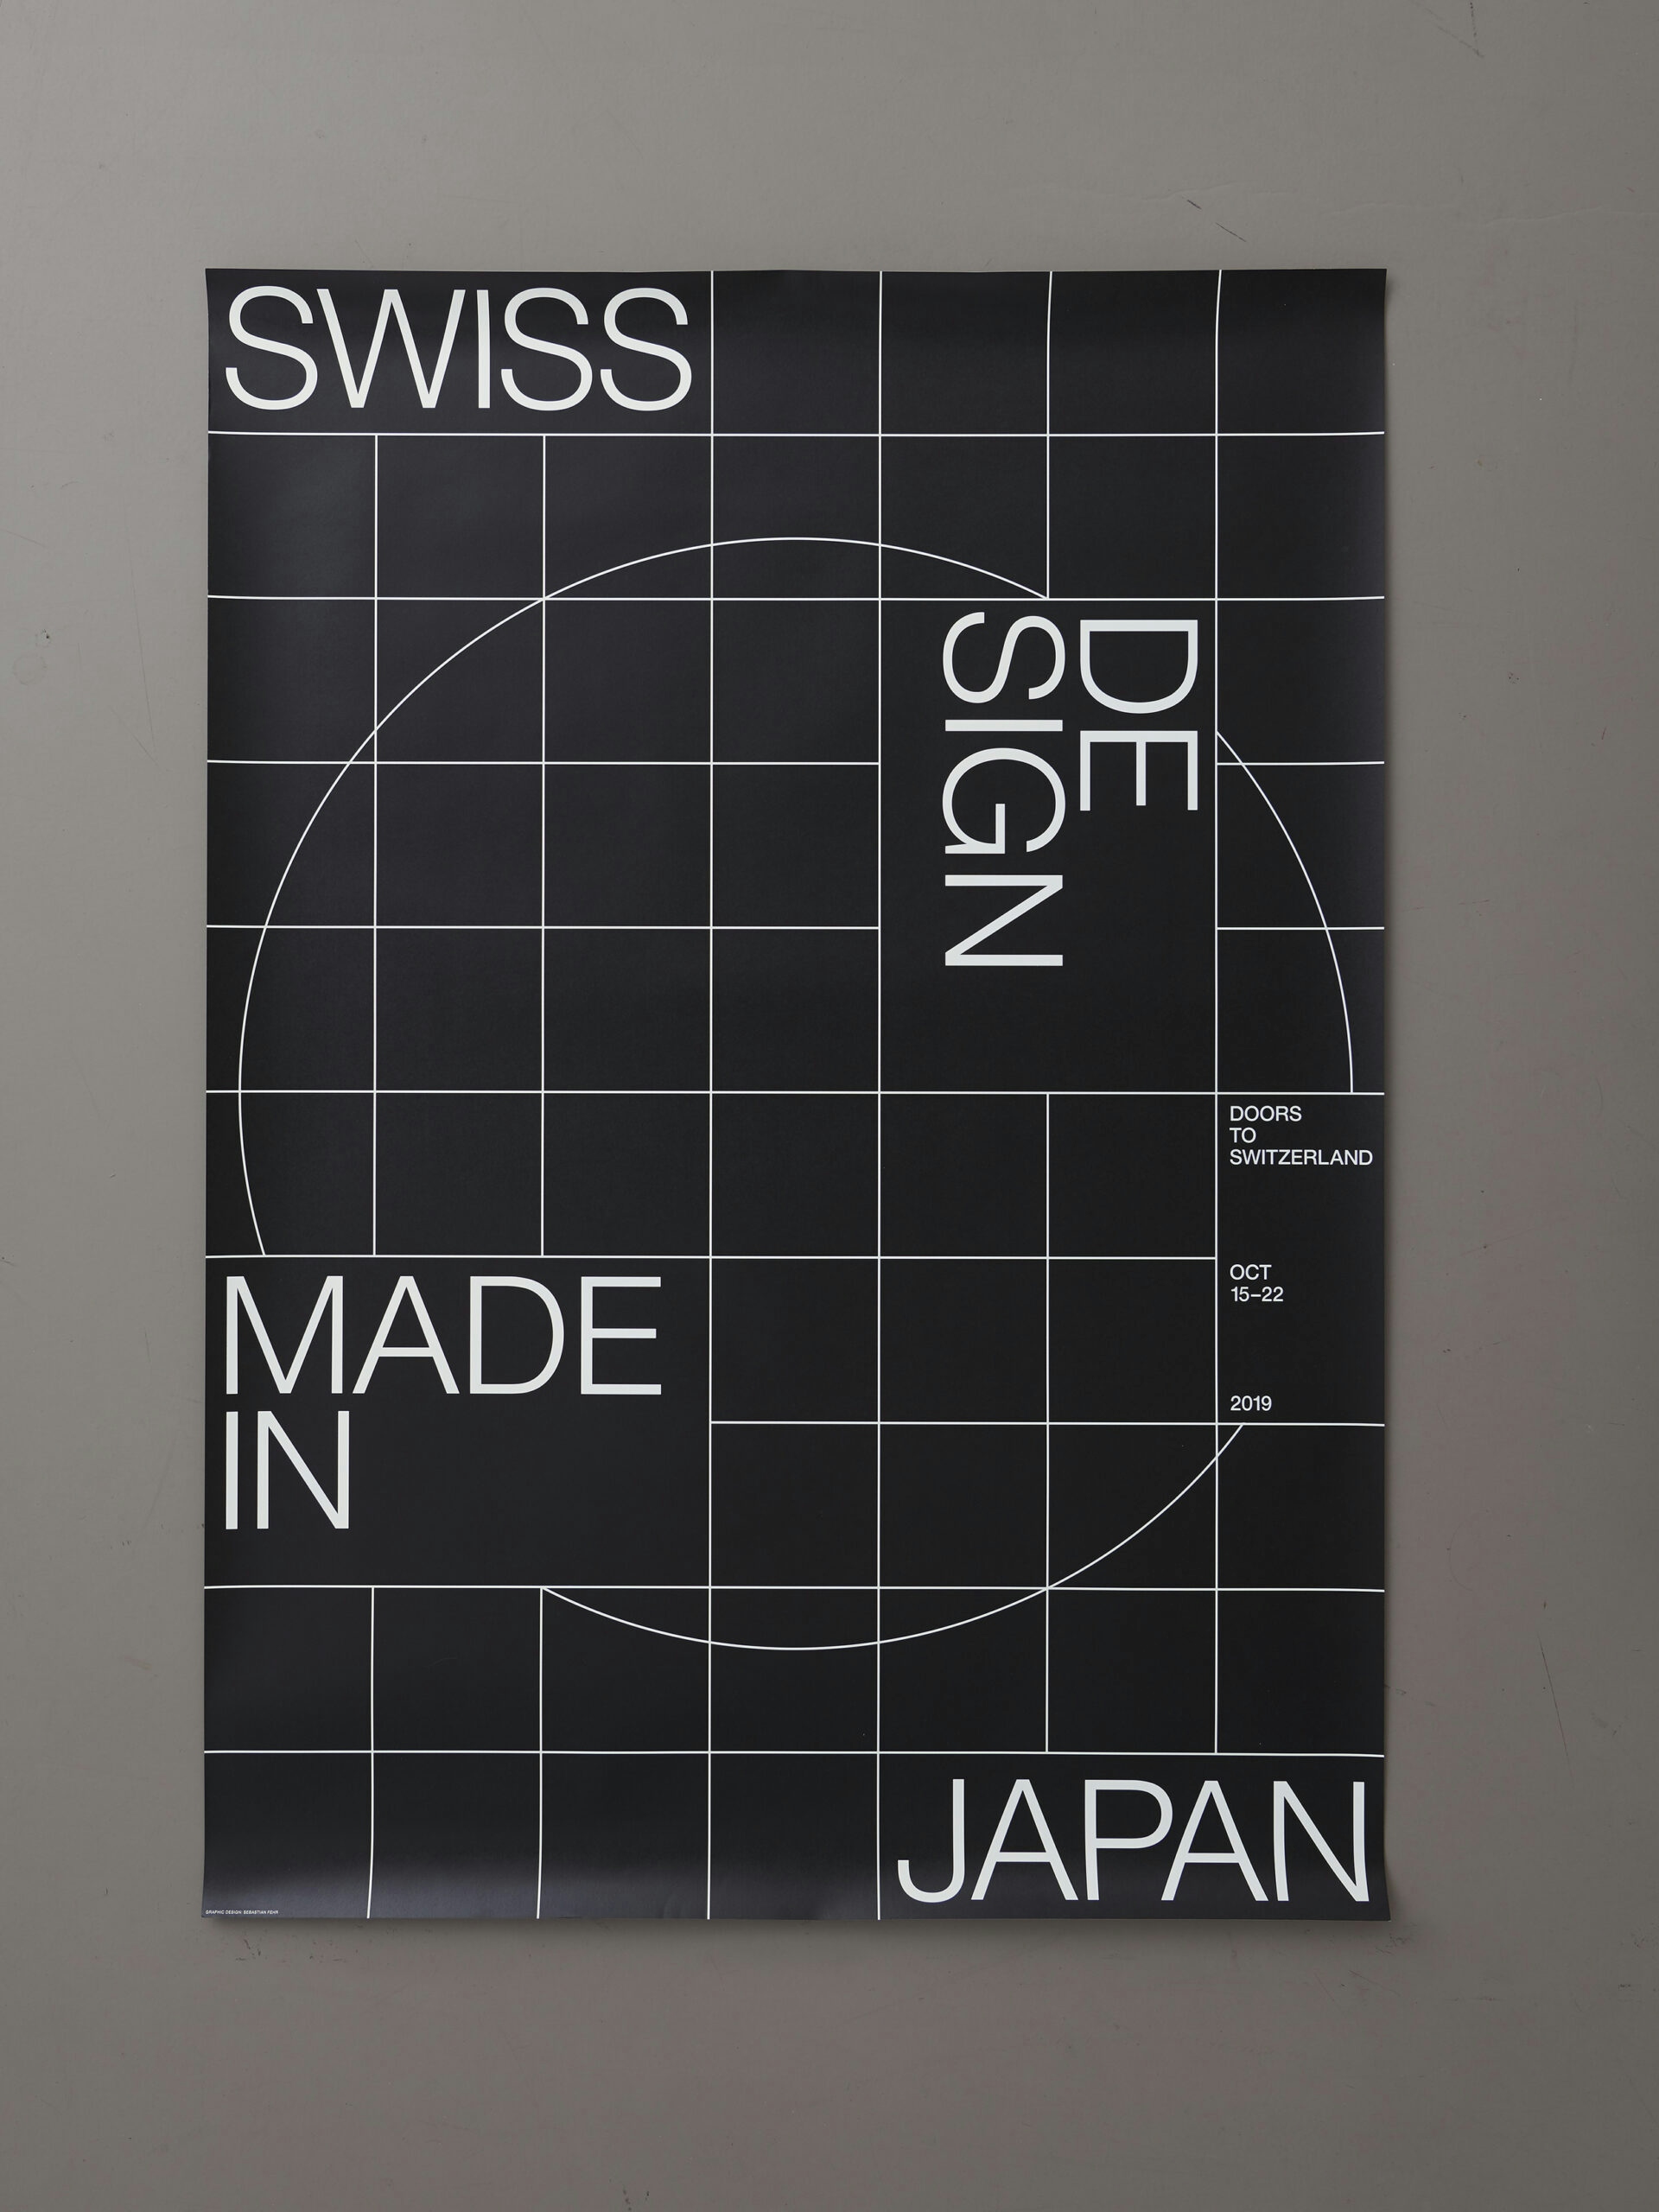 Swiss design made in japan poster